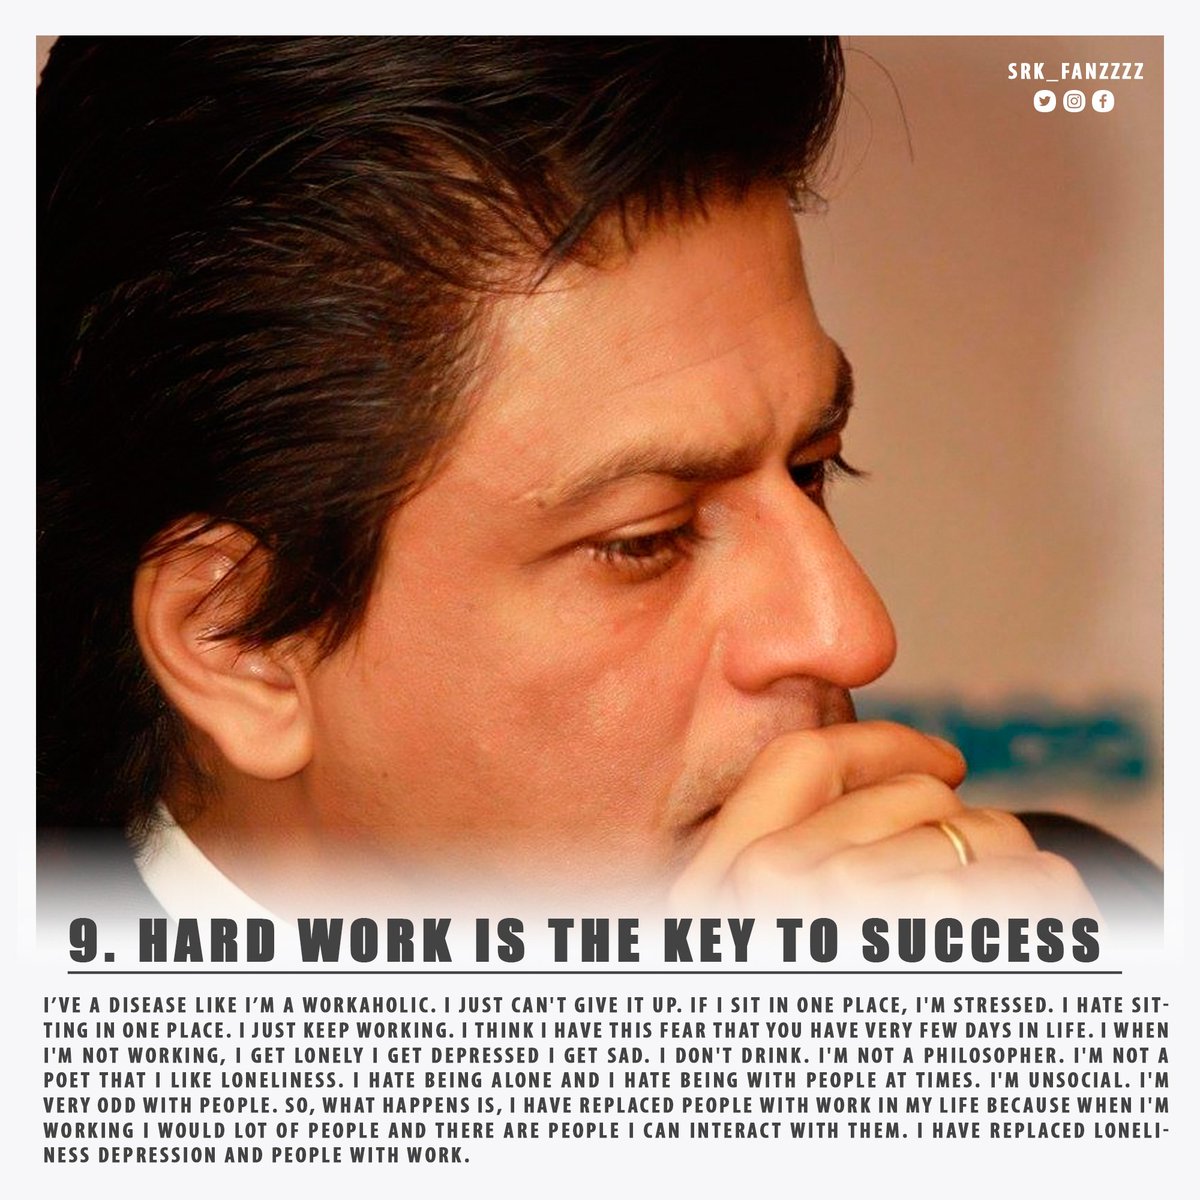 For those who need it, SHAH RUKH KHAN'S TOP 13 RULES FOR SUCCESS (3/4) @iamsrk  #HappyTeachersDay #ShahRukhKhan